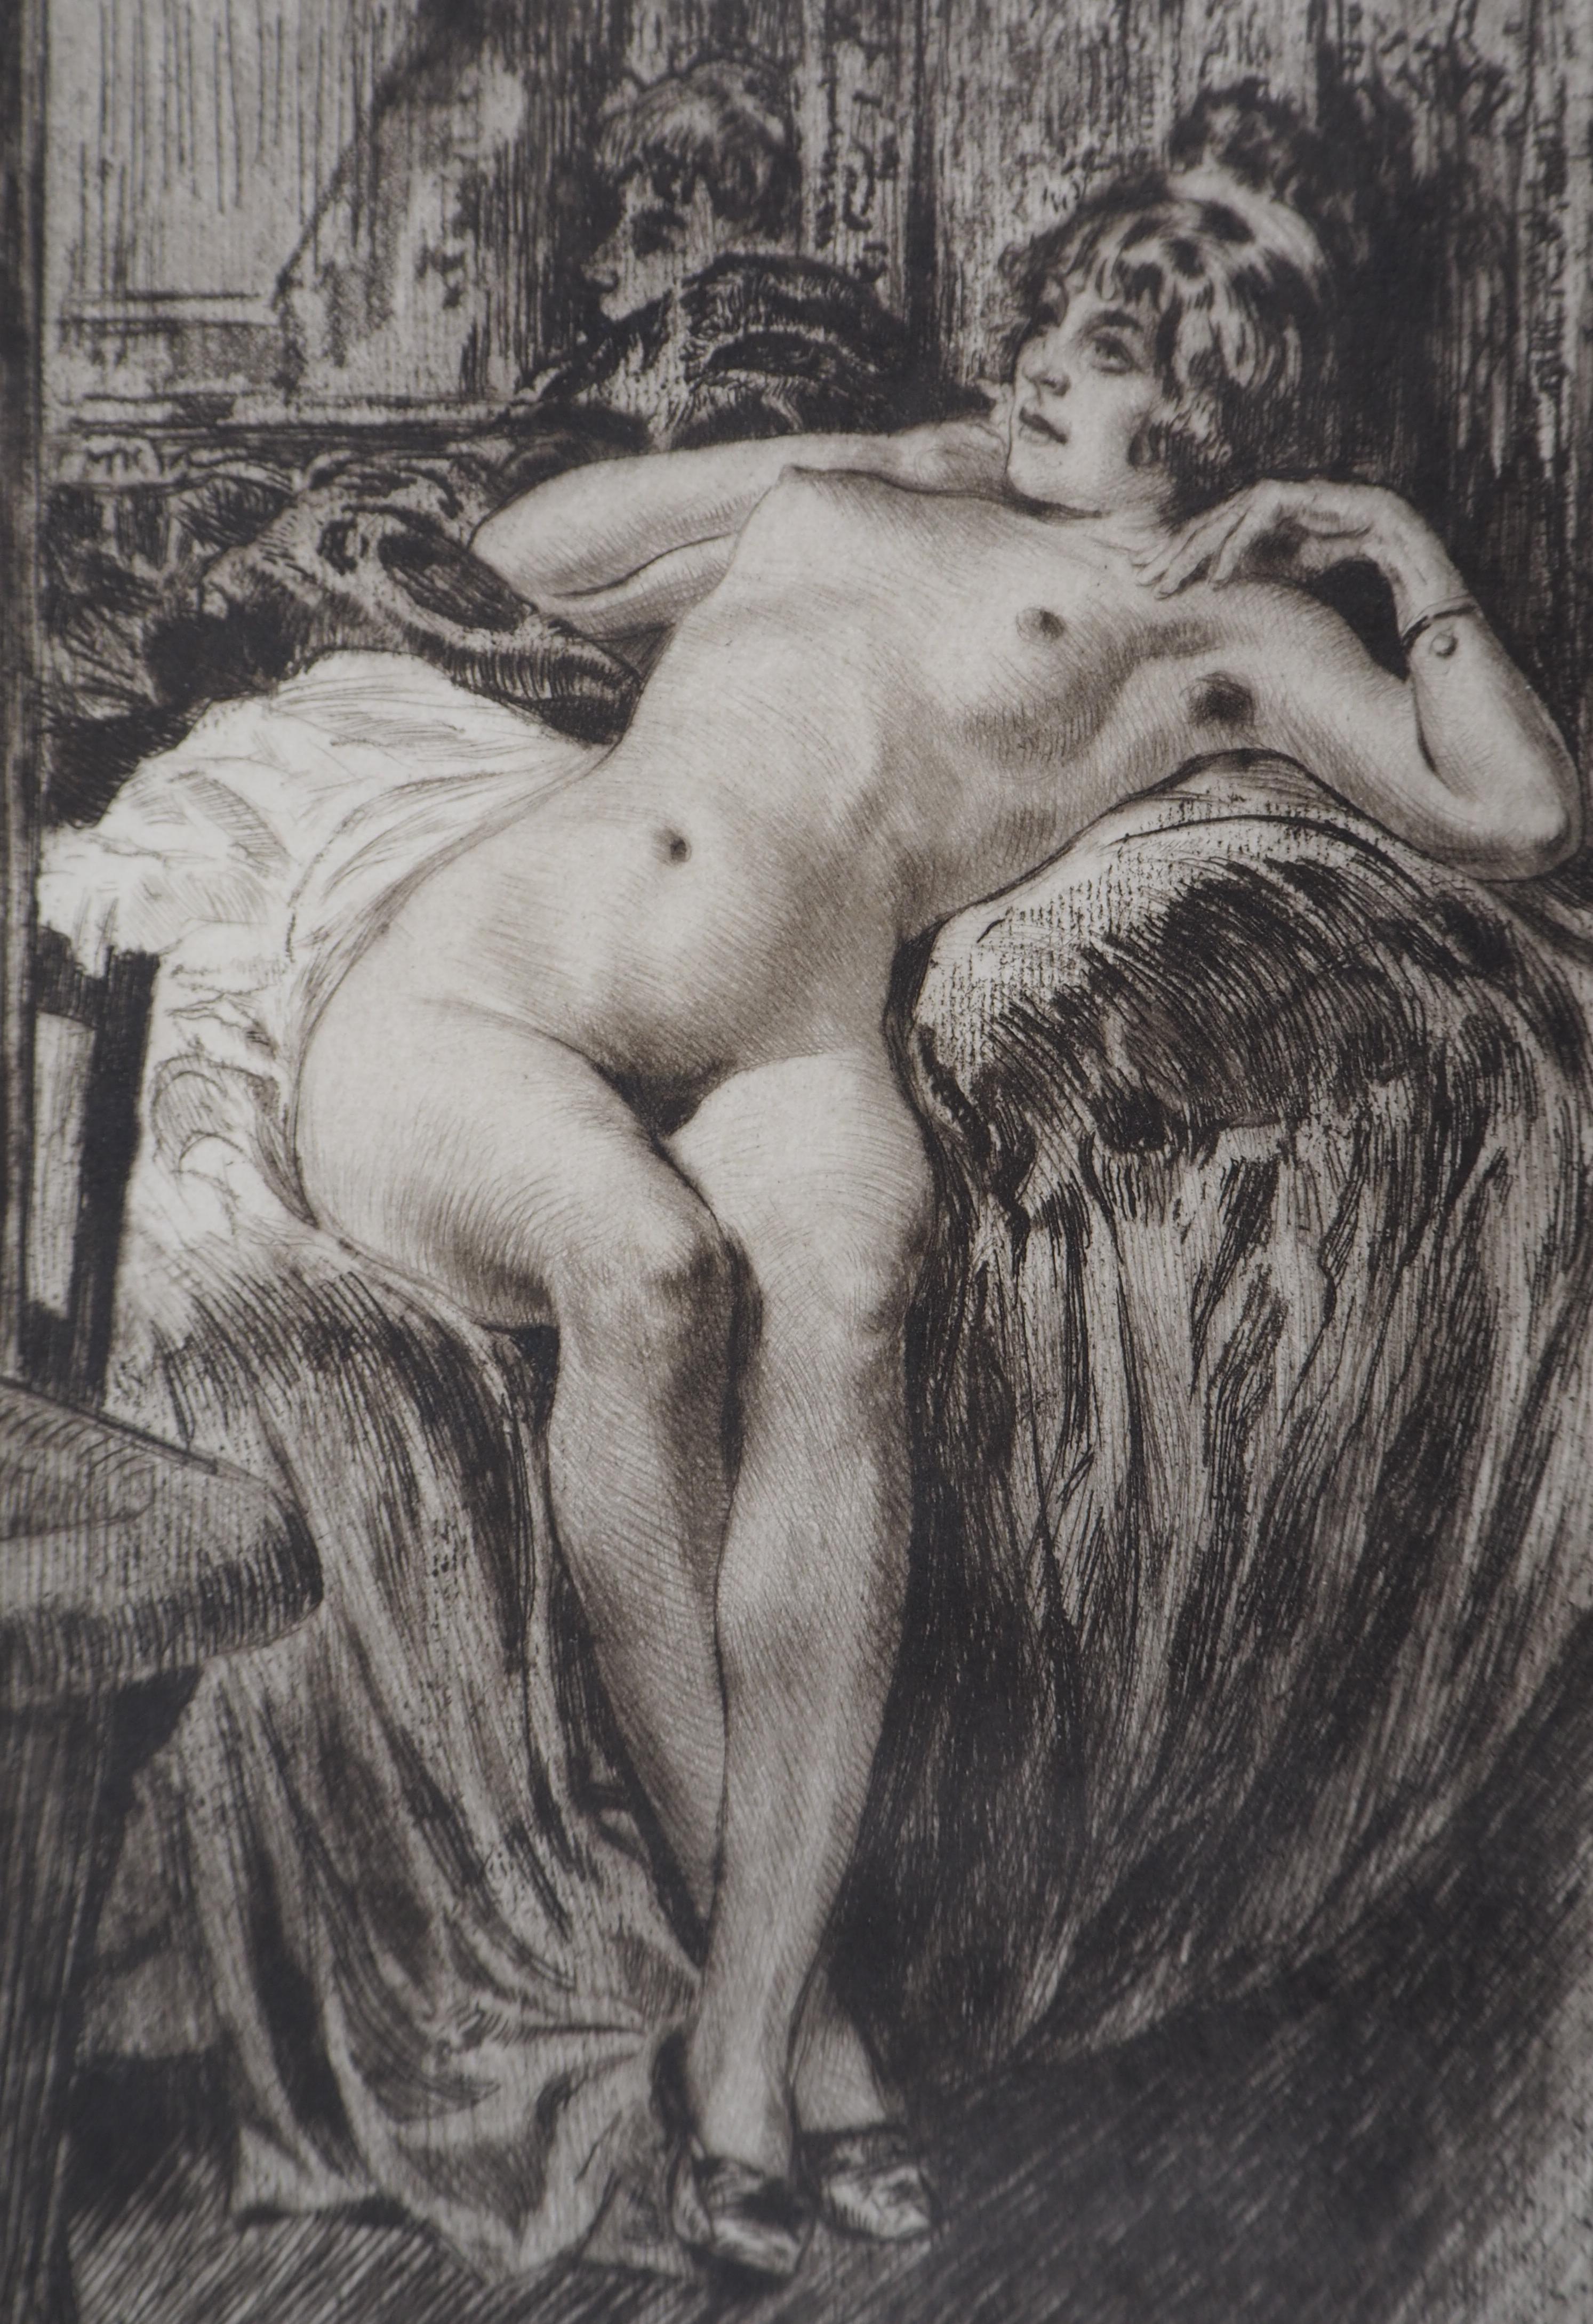 Lying Nude on a bed - Original Etching Handsigned  - Black Nude Print by Almery Lobel-Riche